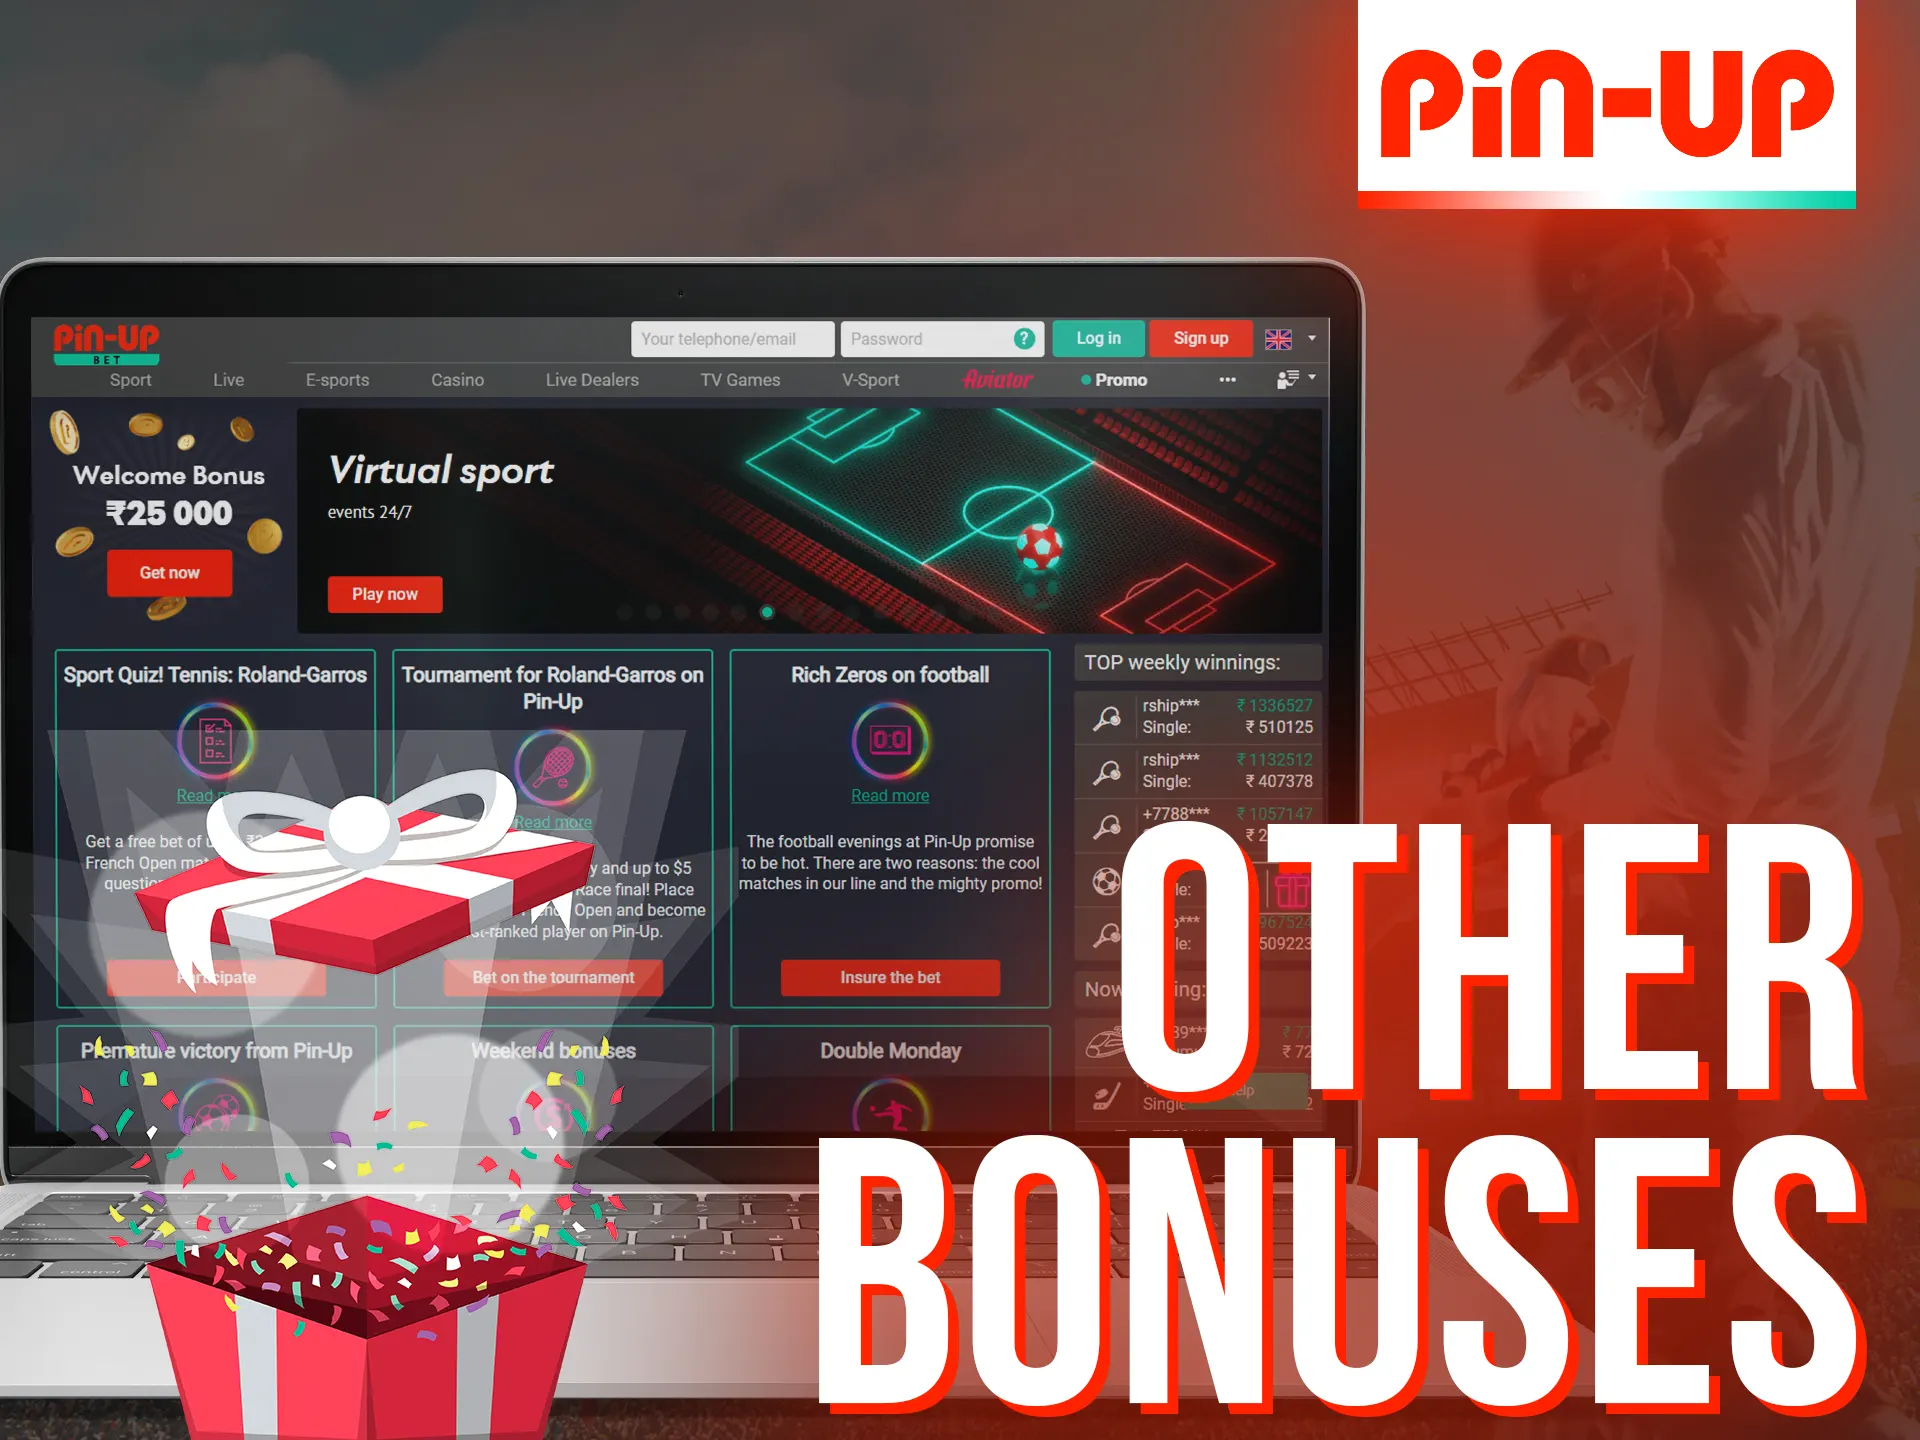 Learn more about other Pin Up bonuses.